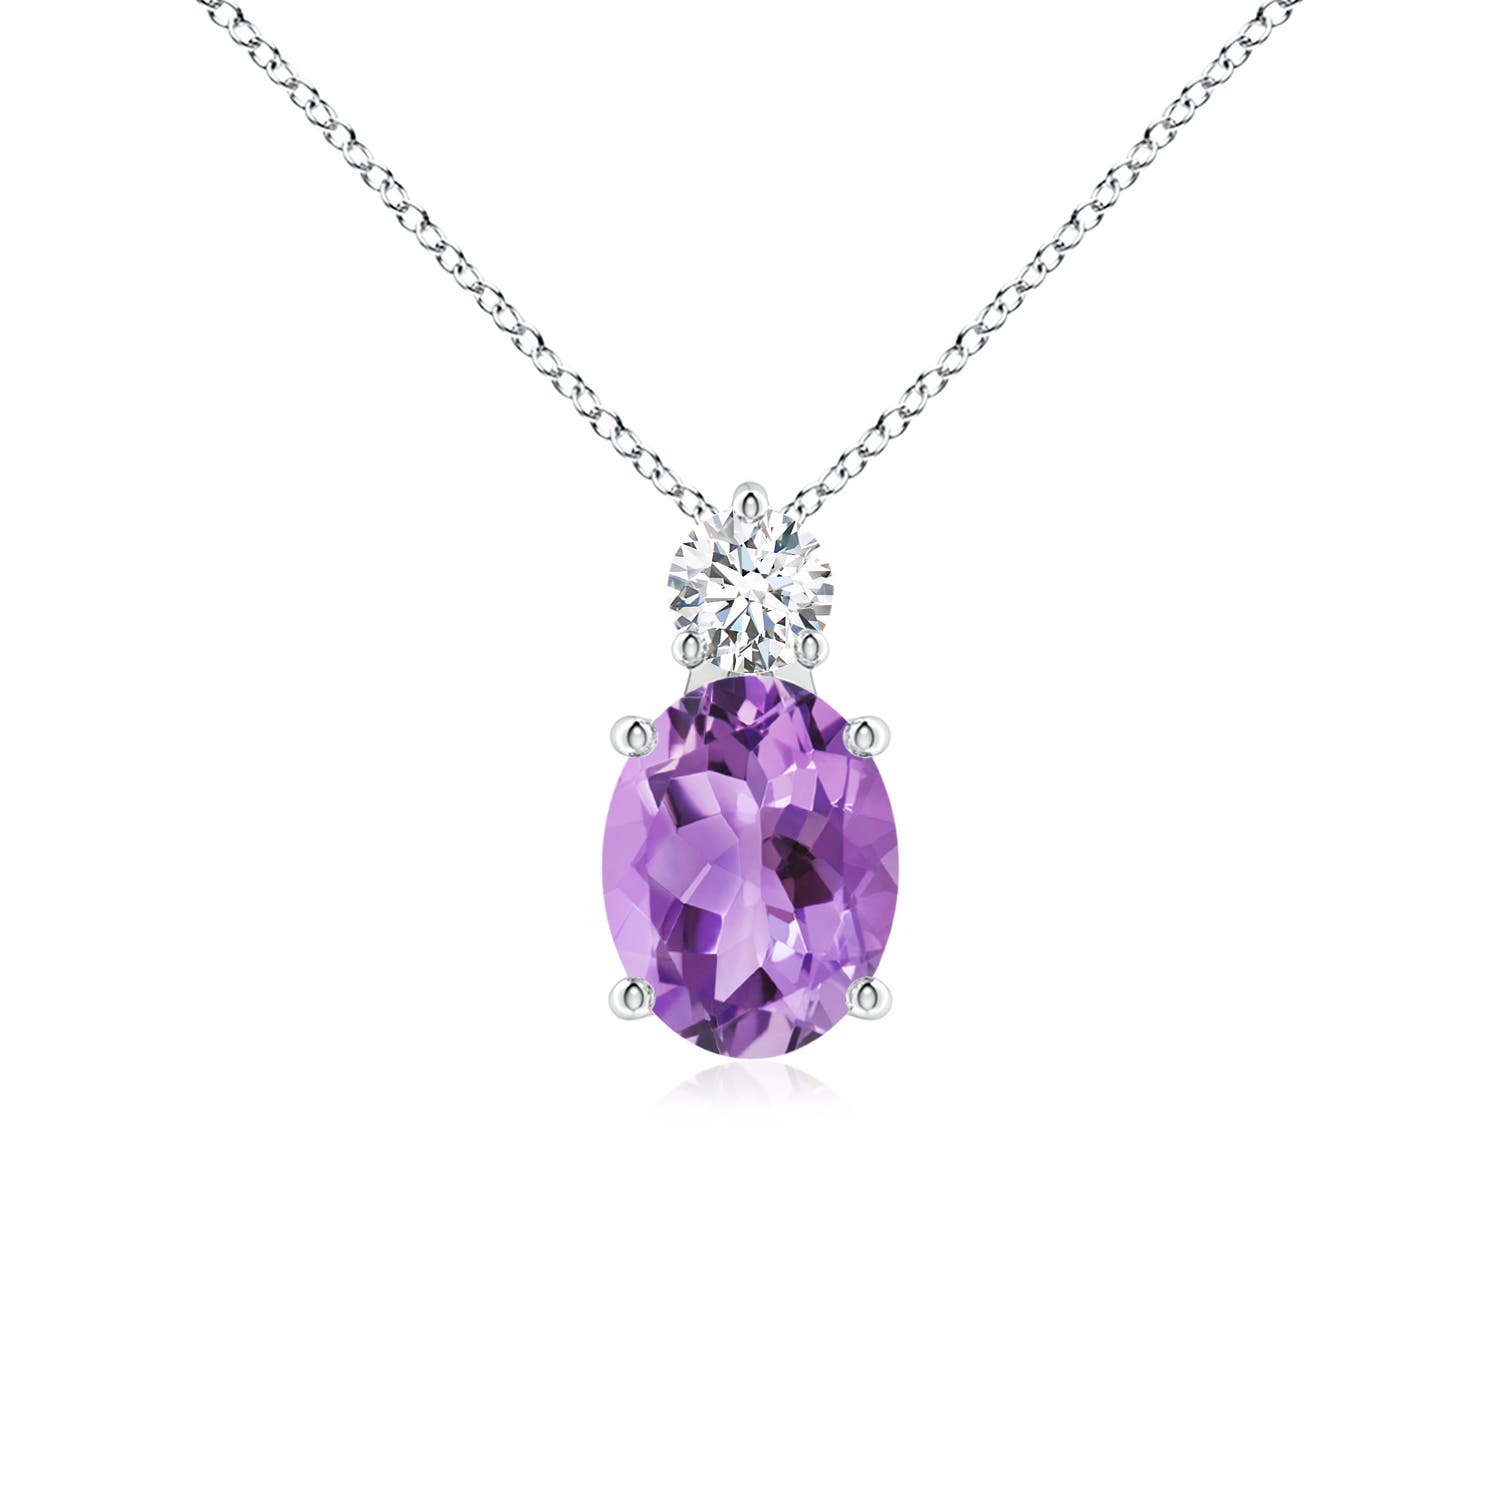 A - Amethyst / 1.83 CT / 14 KT White Gold